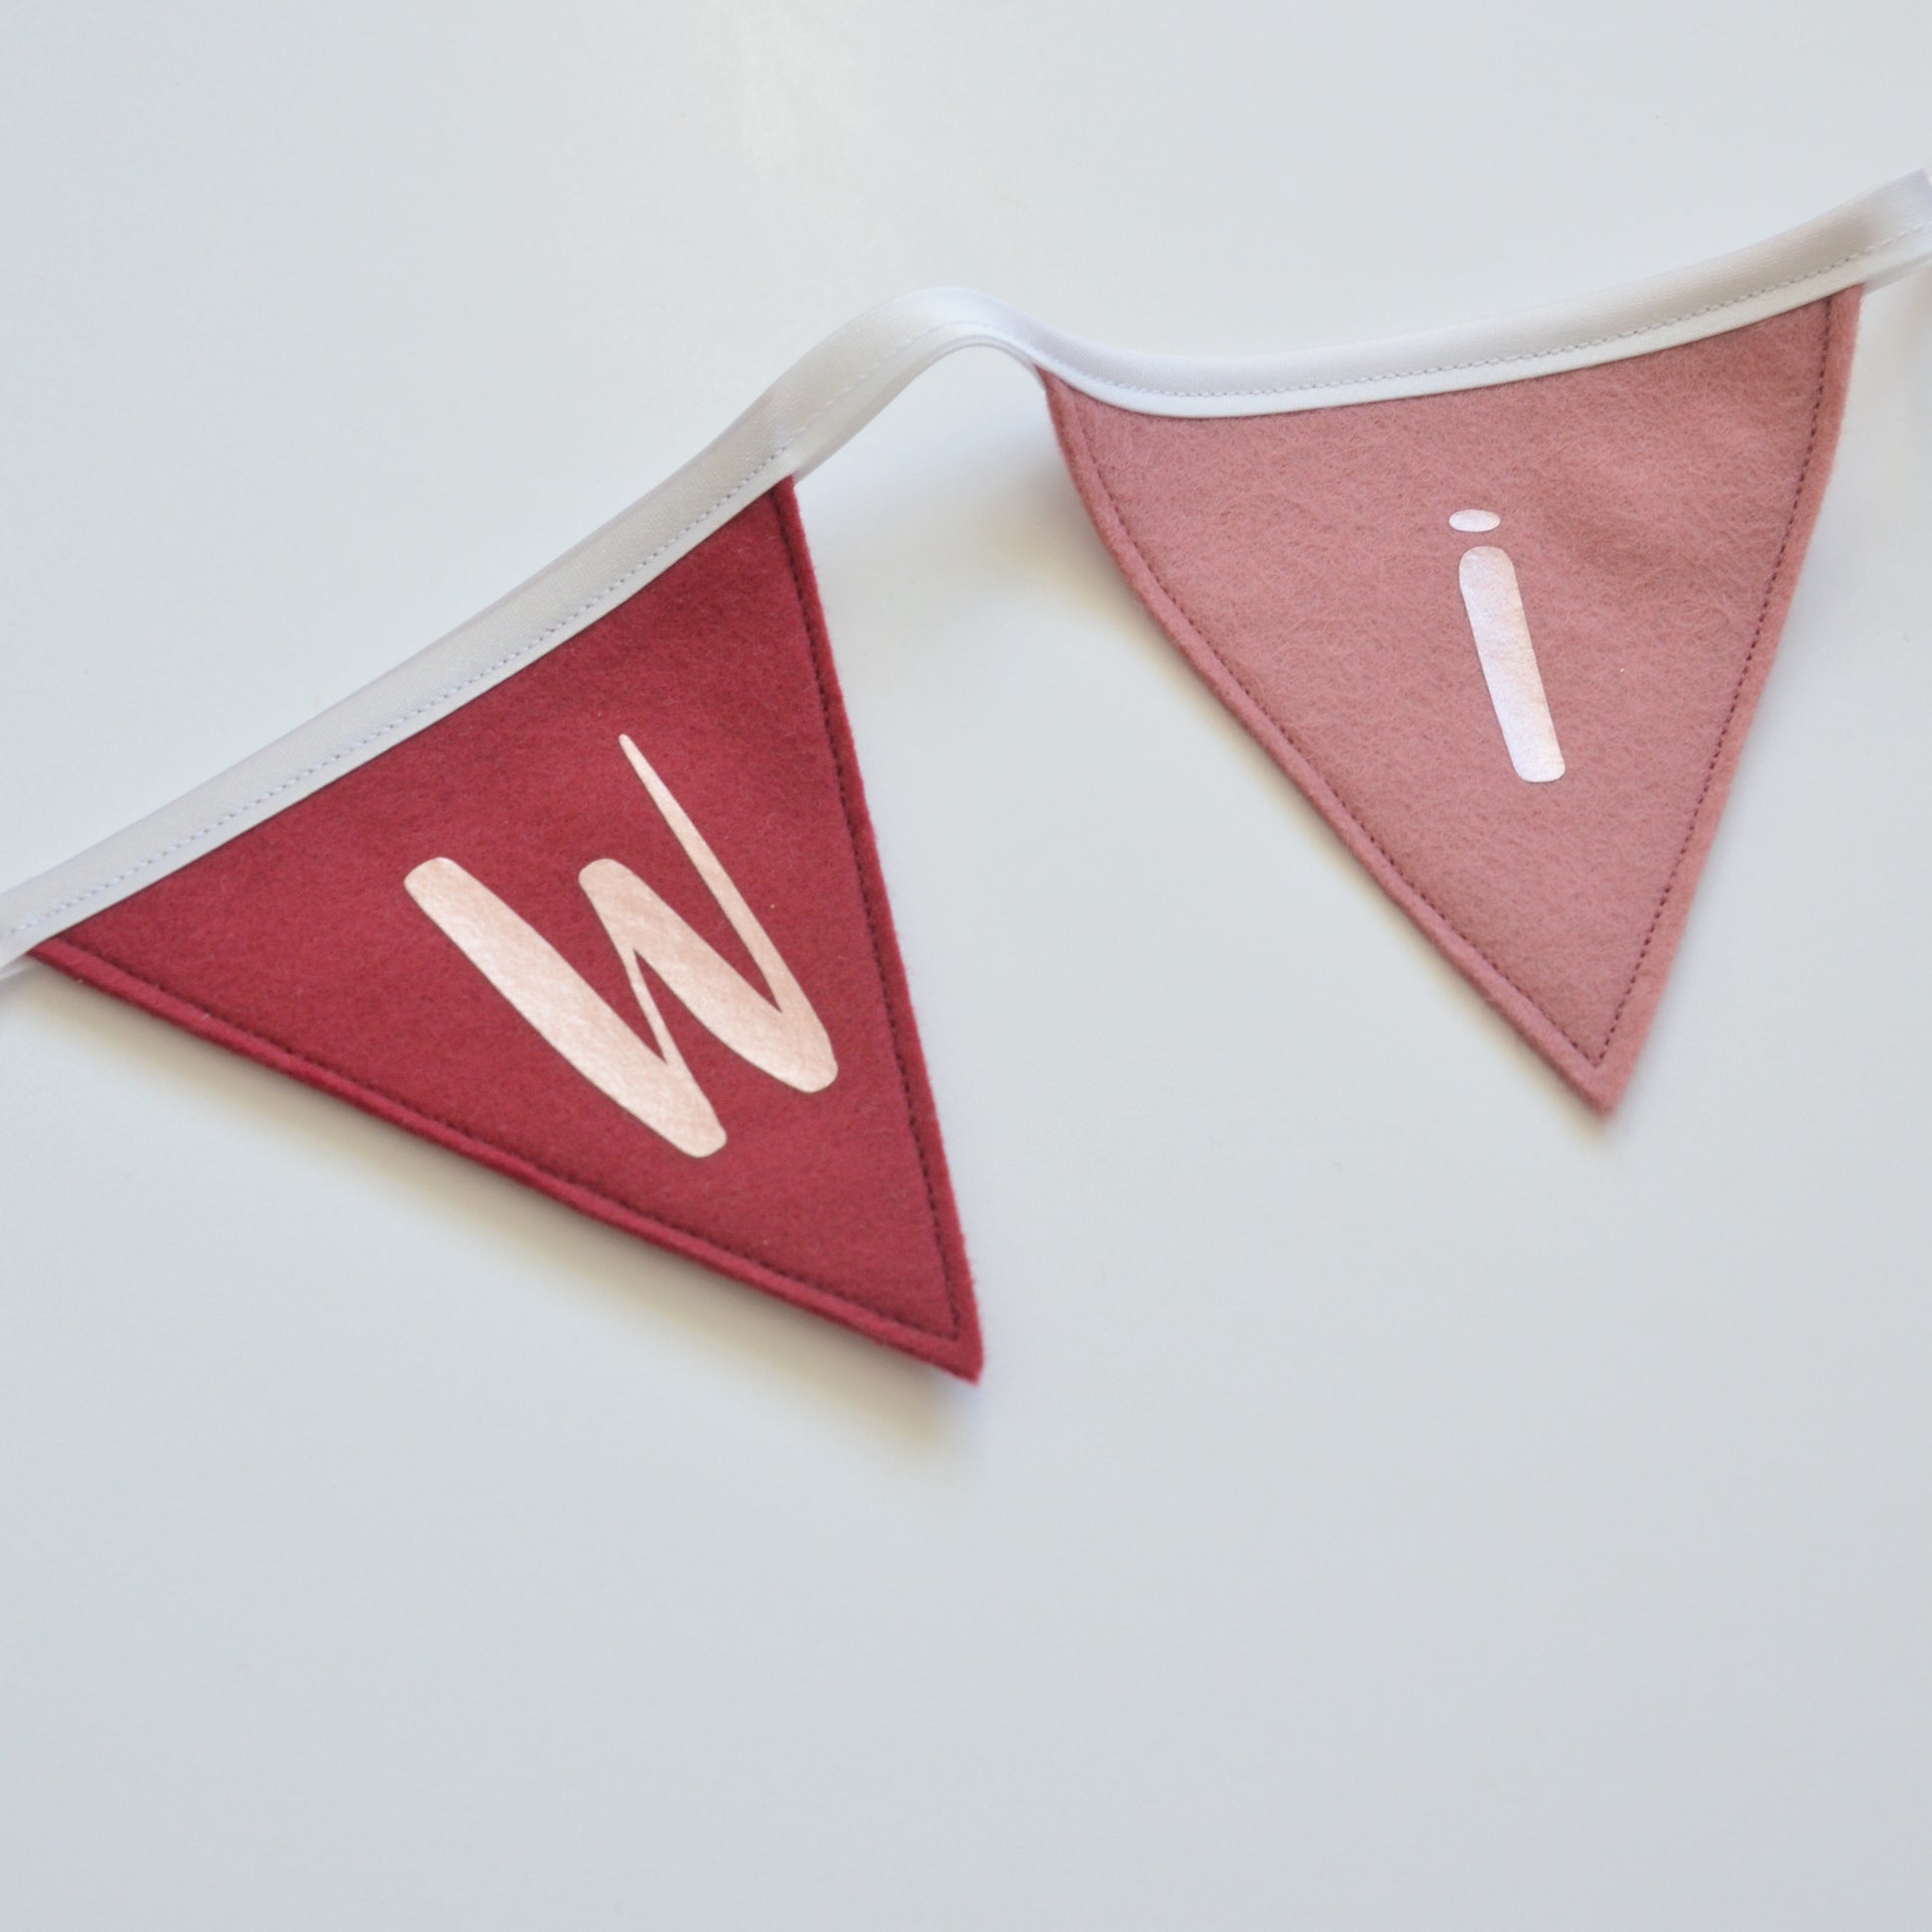 Name Bunting for baby nursery